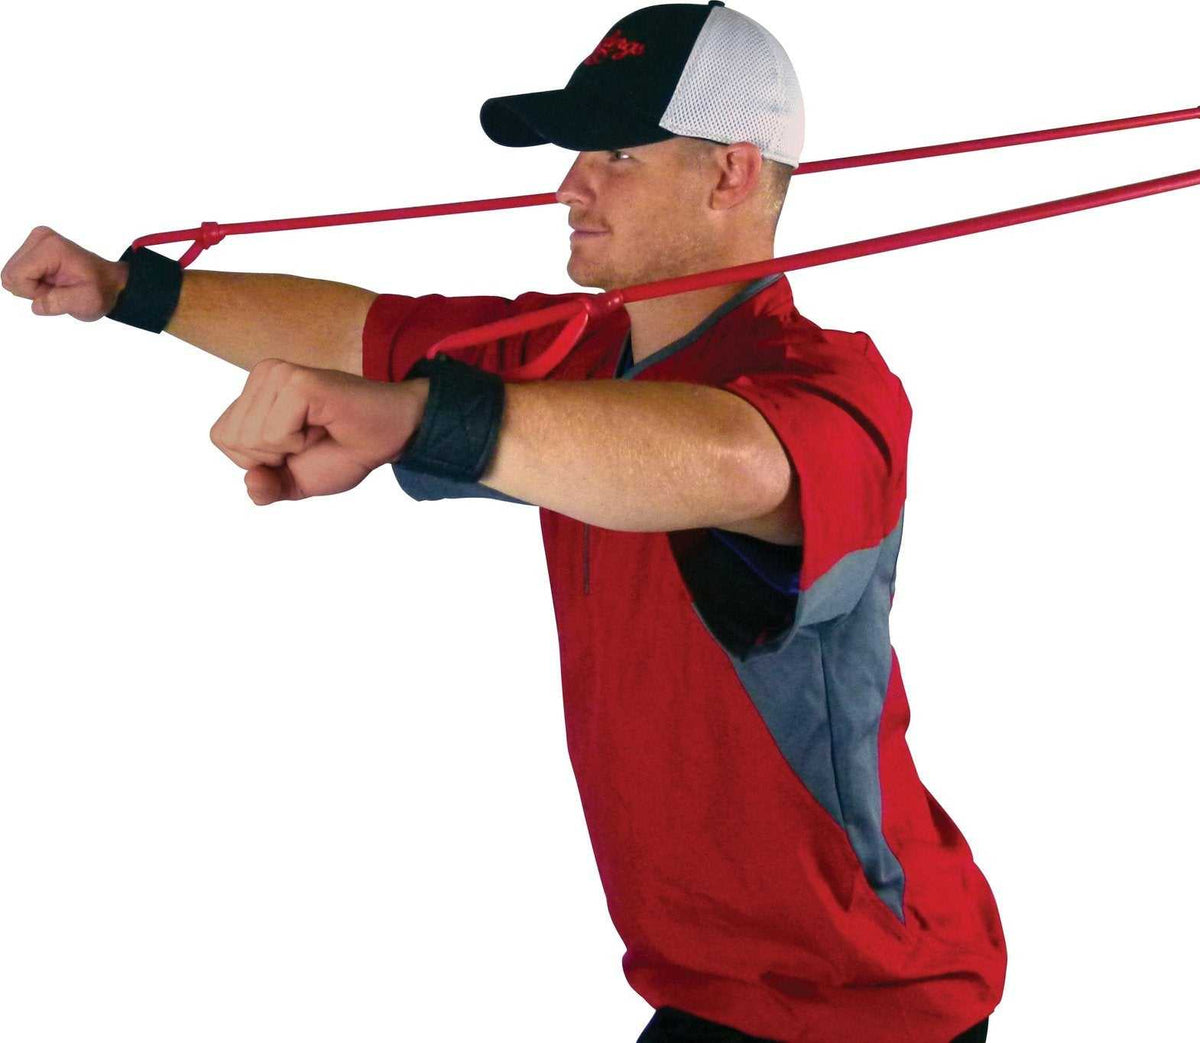 Rawlings Resistance Band - HIT a Double